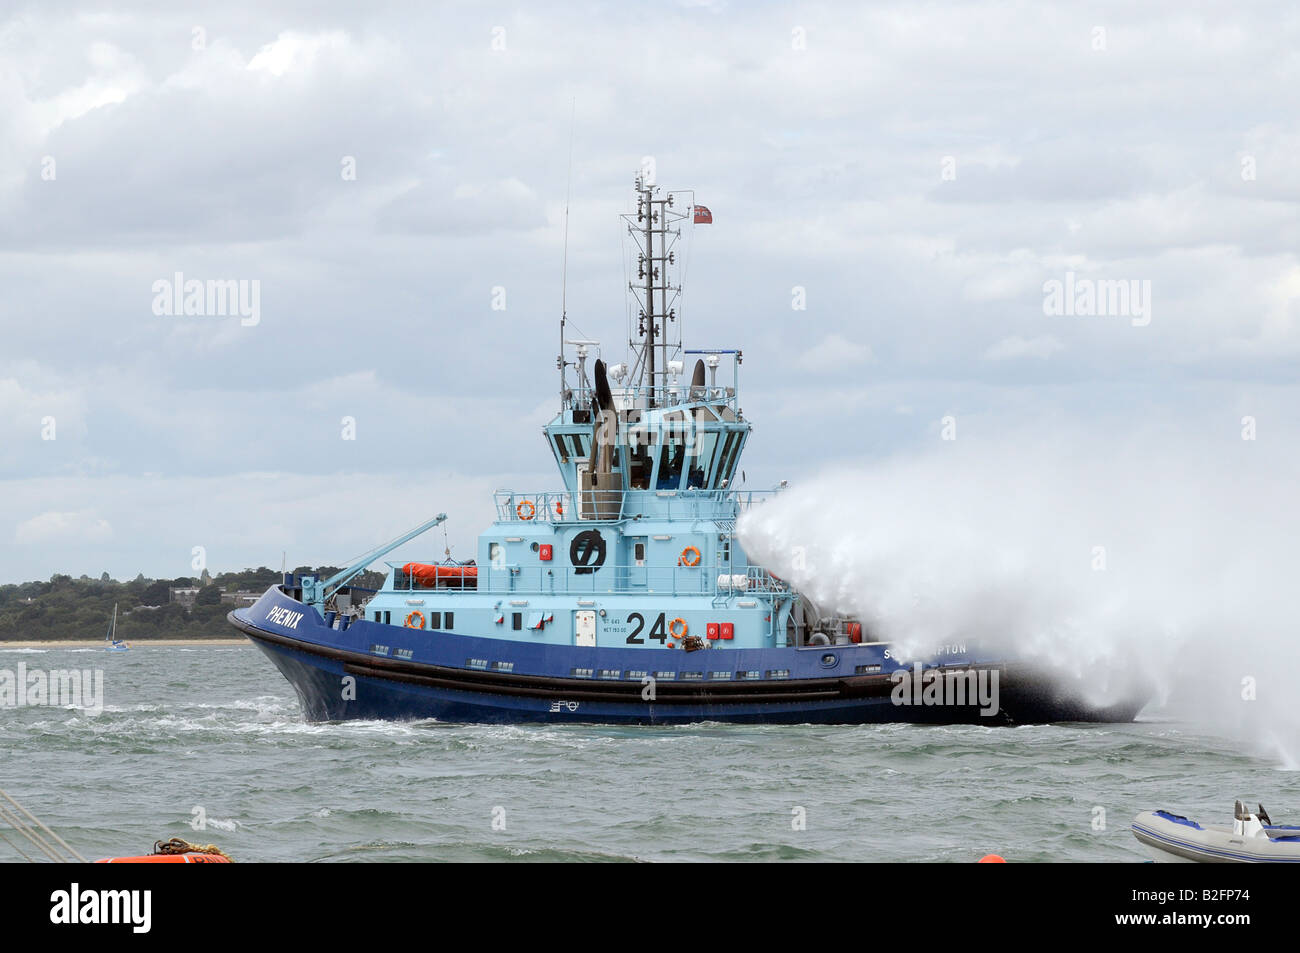 tug boat with fire fighting capabilities designed for towing tankships oil Tankers Stock Photo